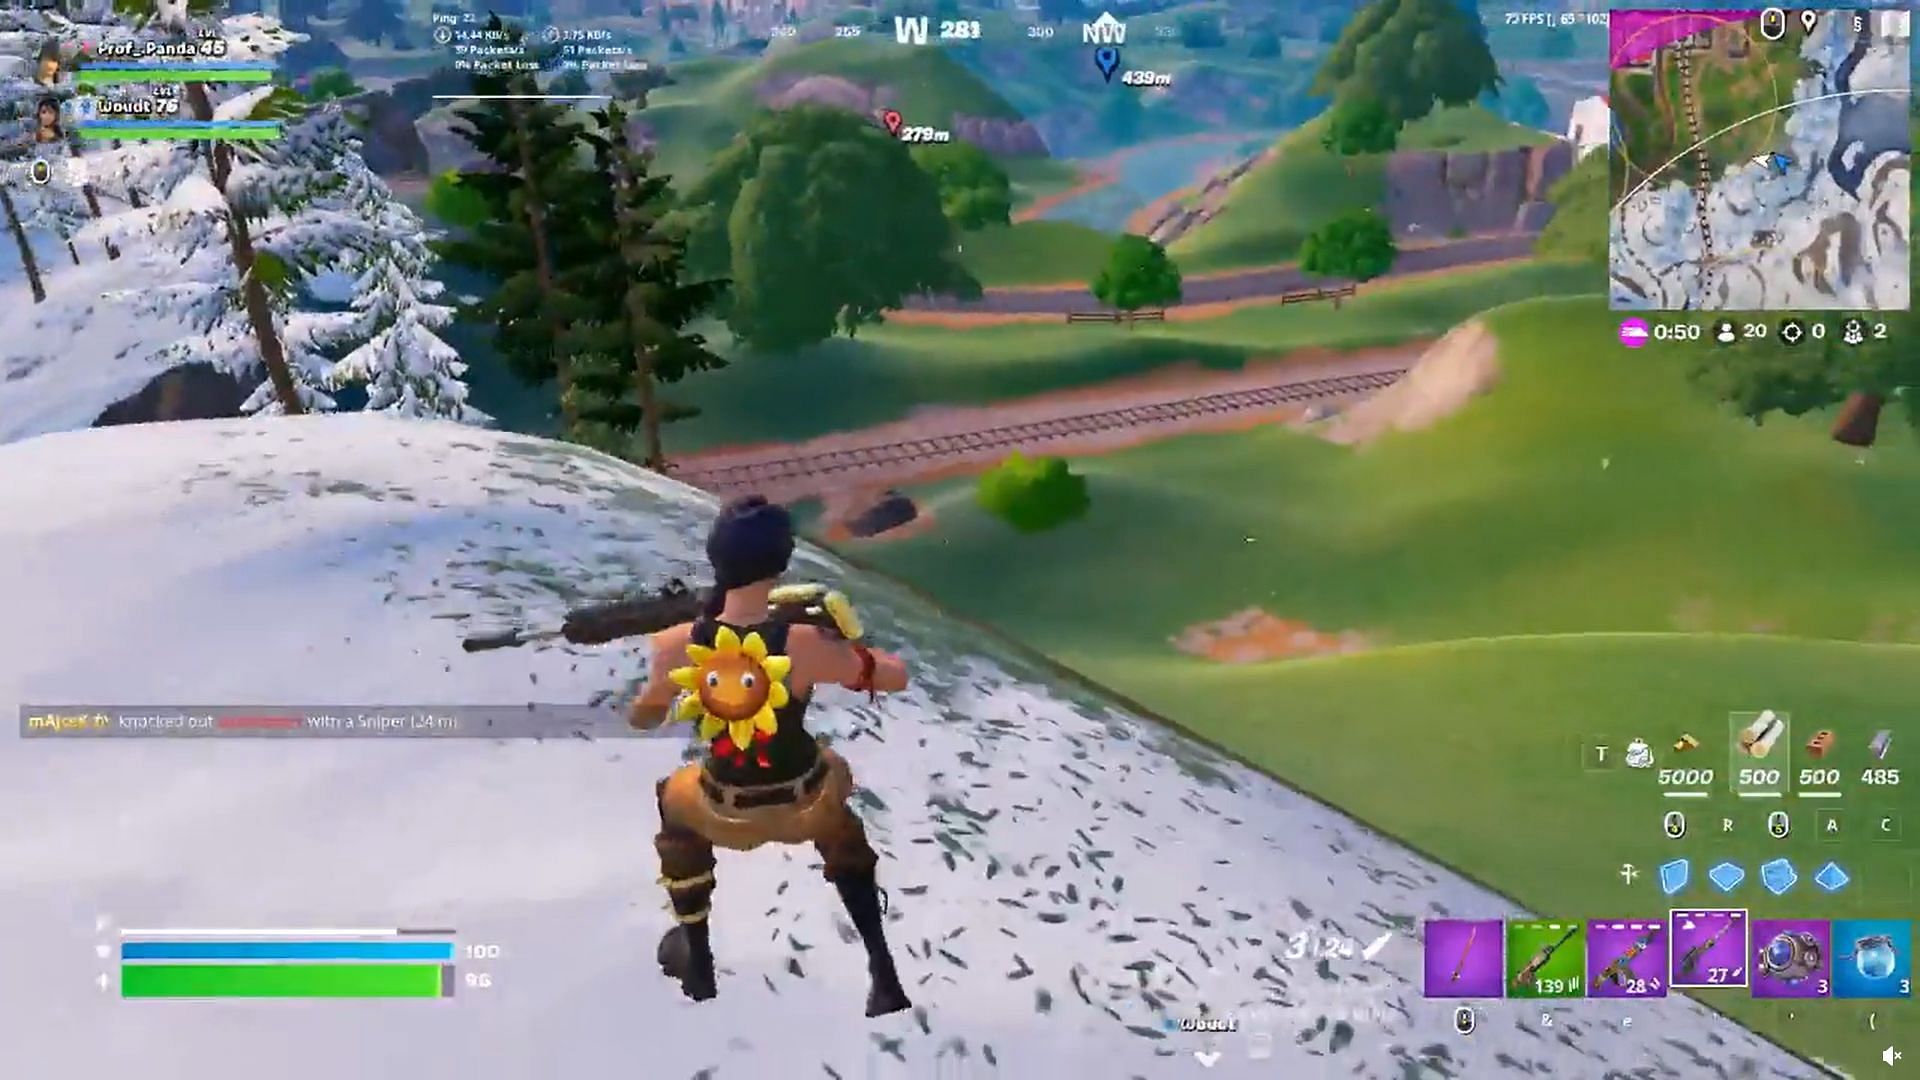 Fortnite player pulls off unbelievable no-scope headshot, community left in awe